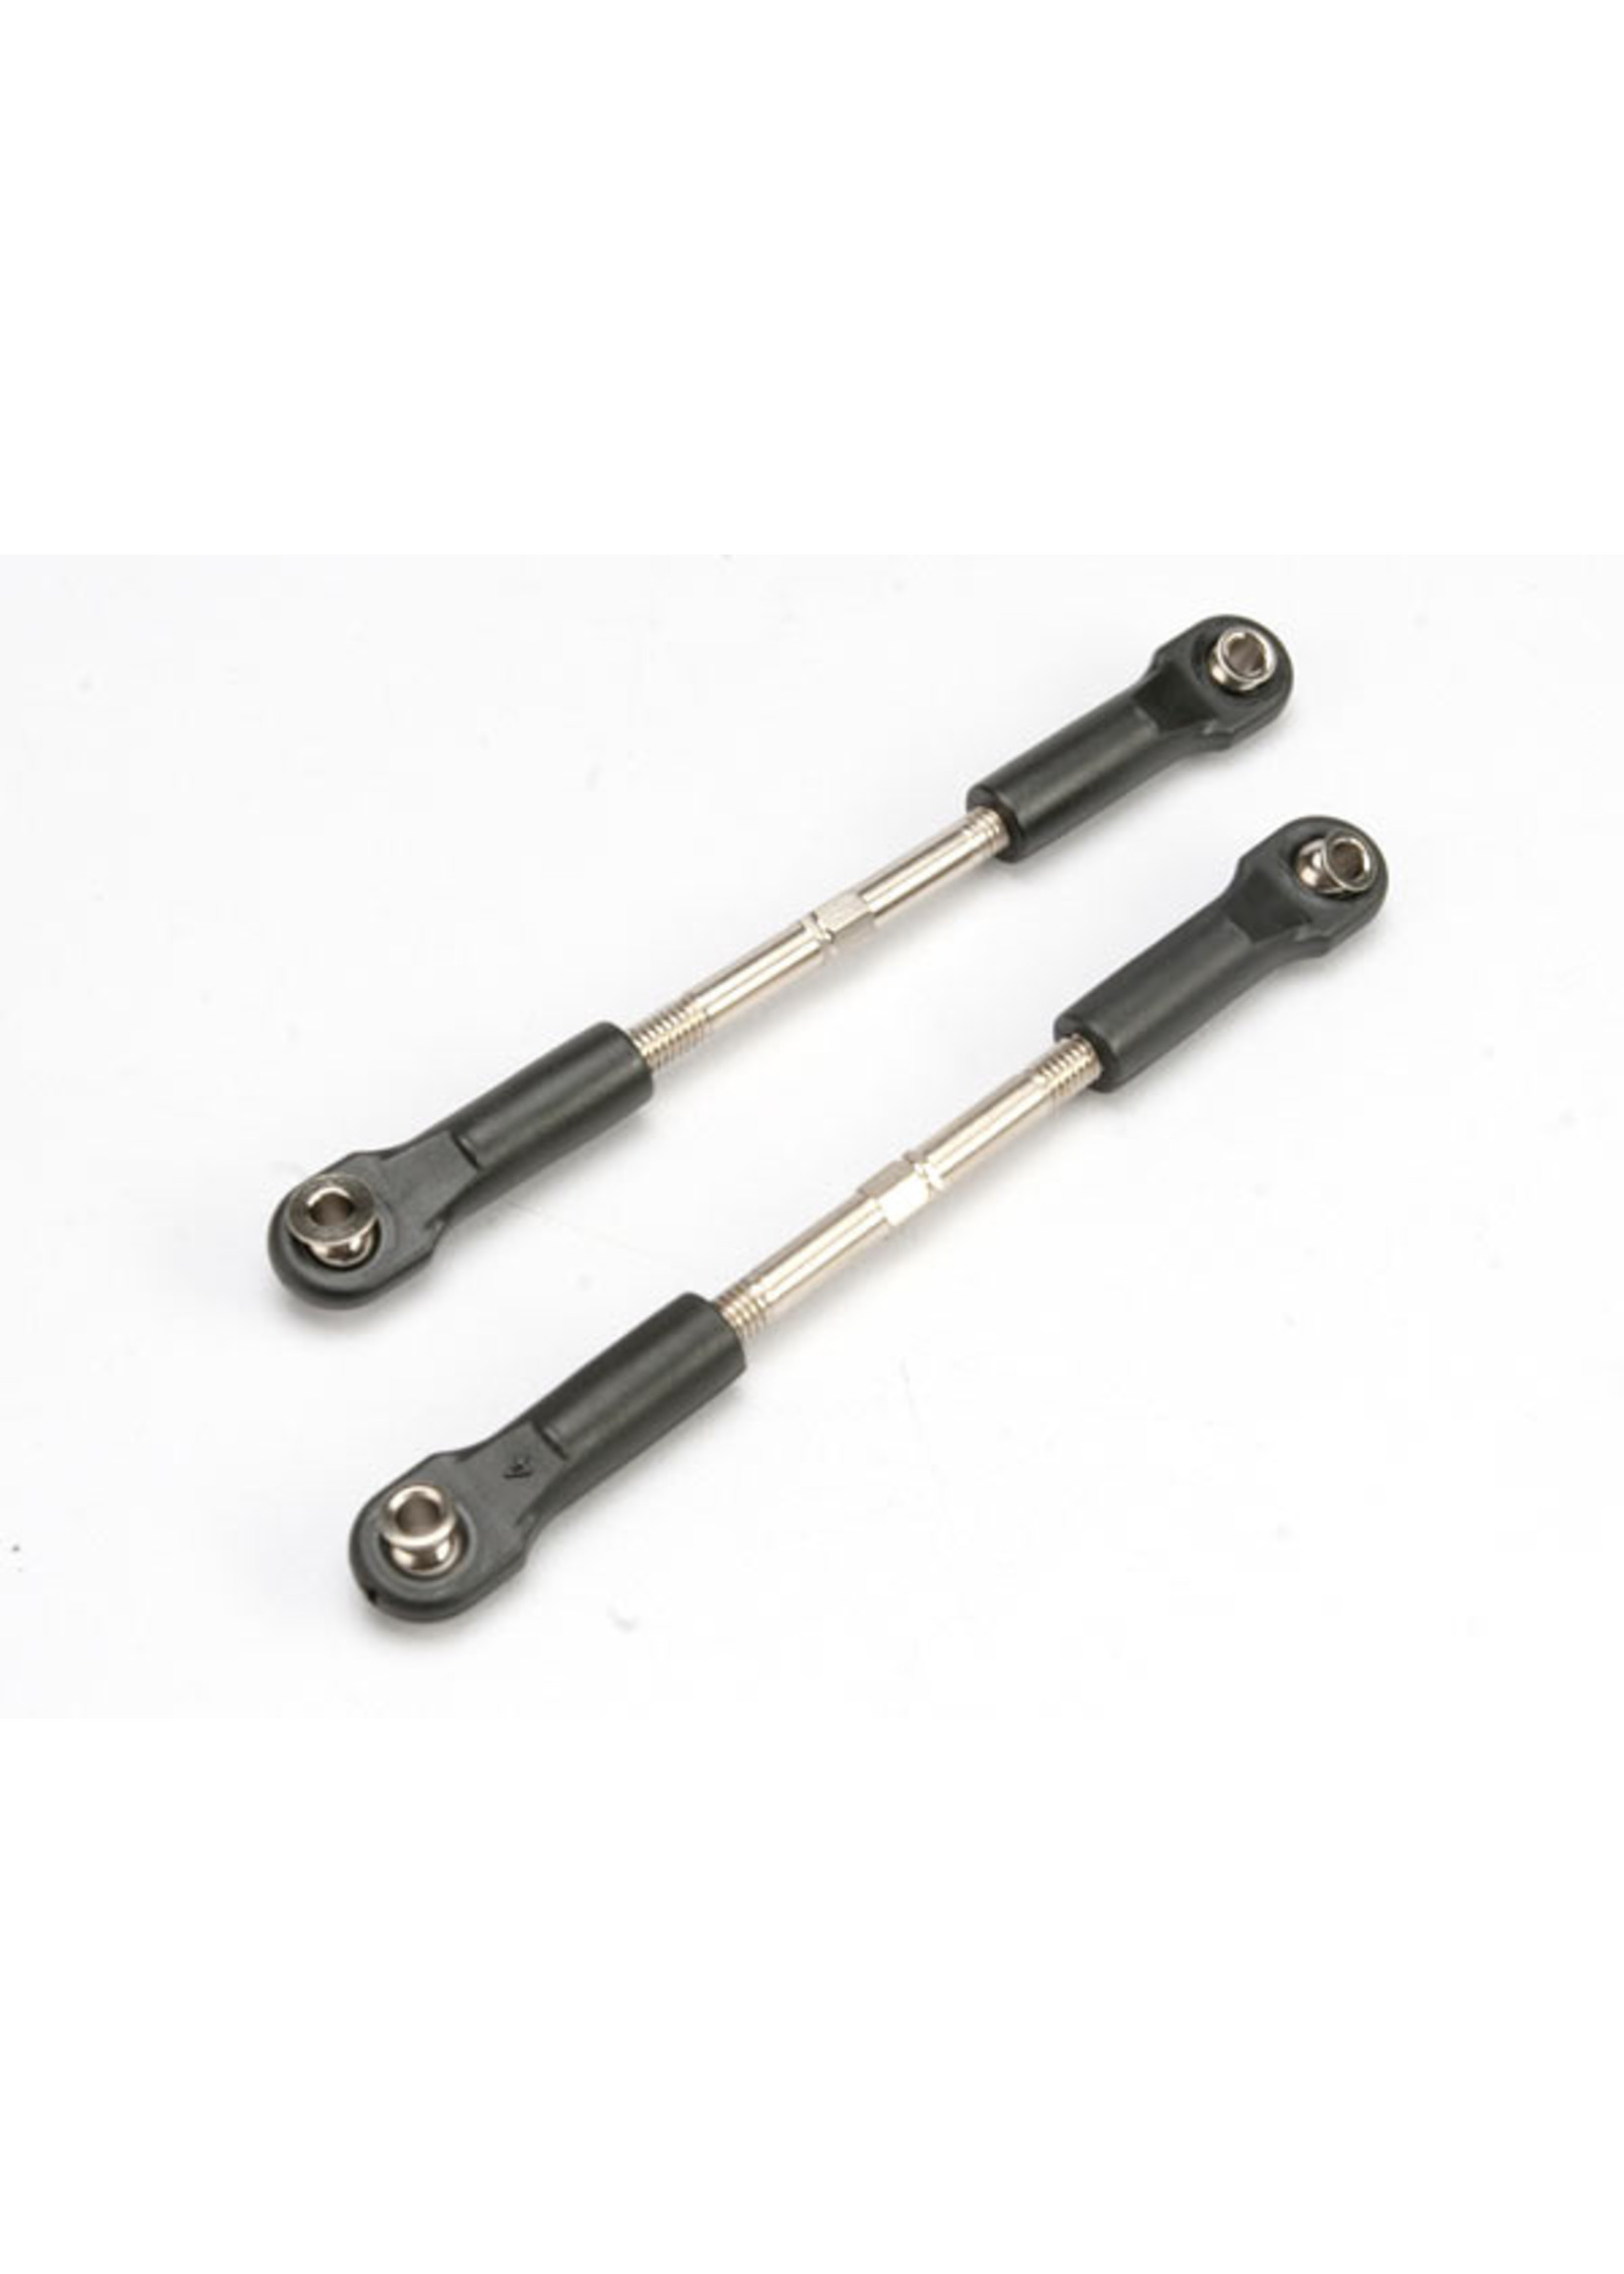 Traxxas 5539 - 58mm Camber Links Turnbuckles (2)